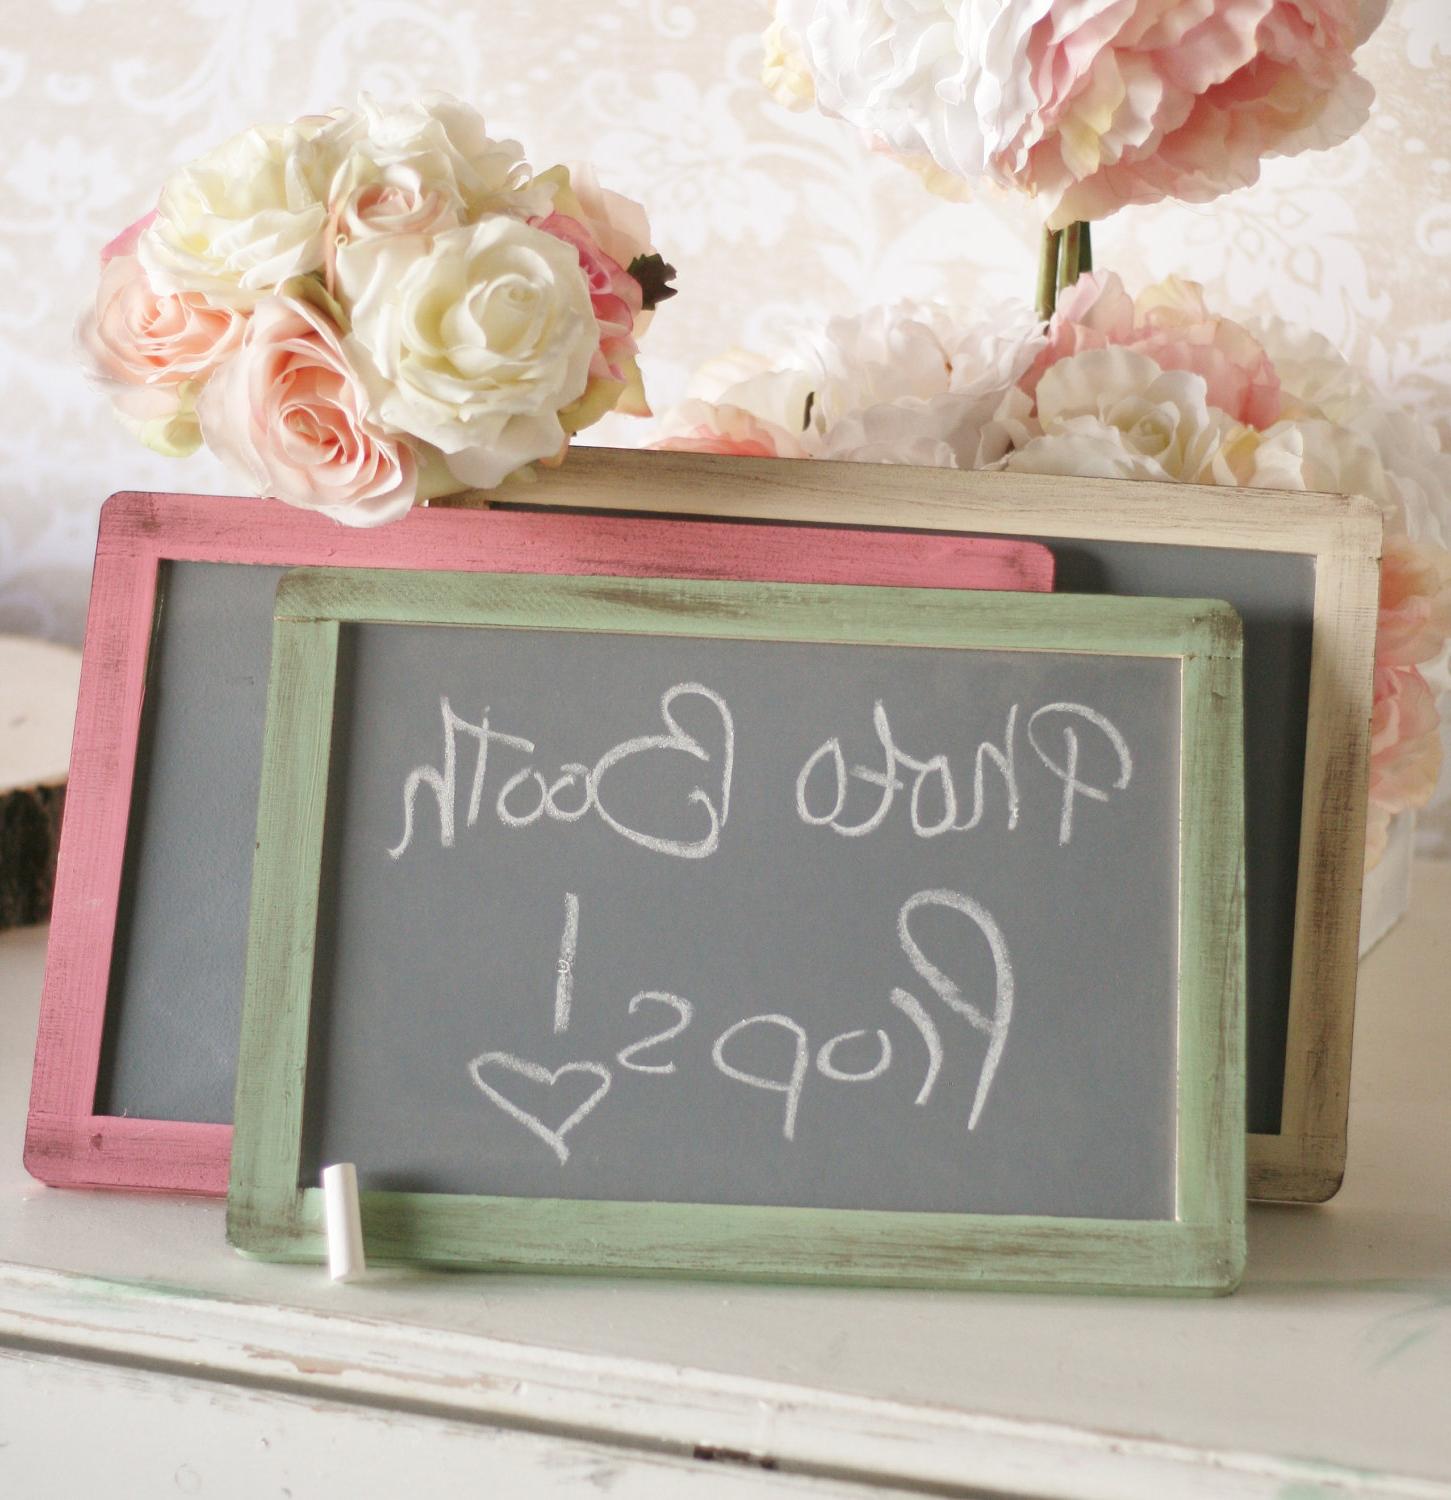 Chalkboard Signs Shabby Chic Rustic Wedding. From braggingbags